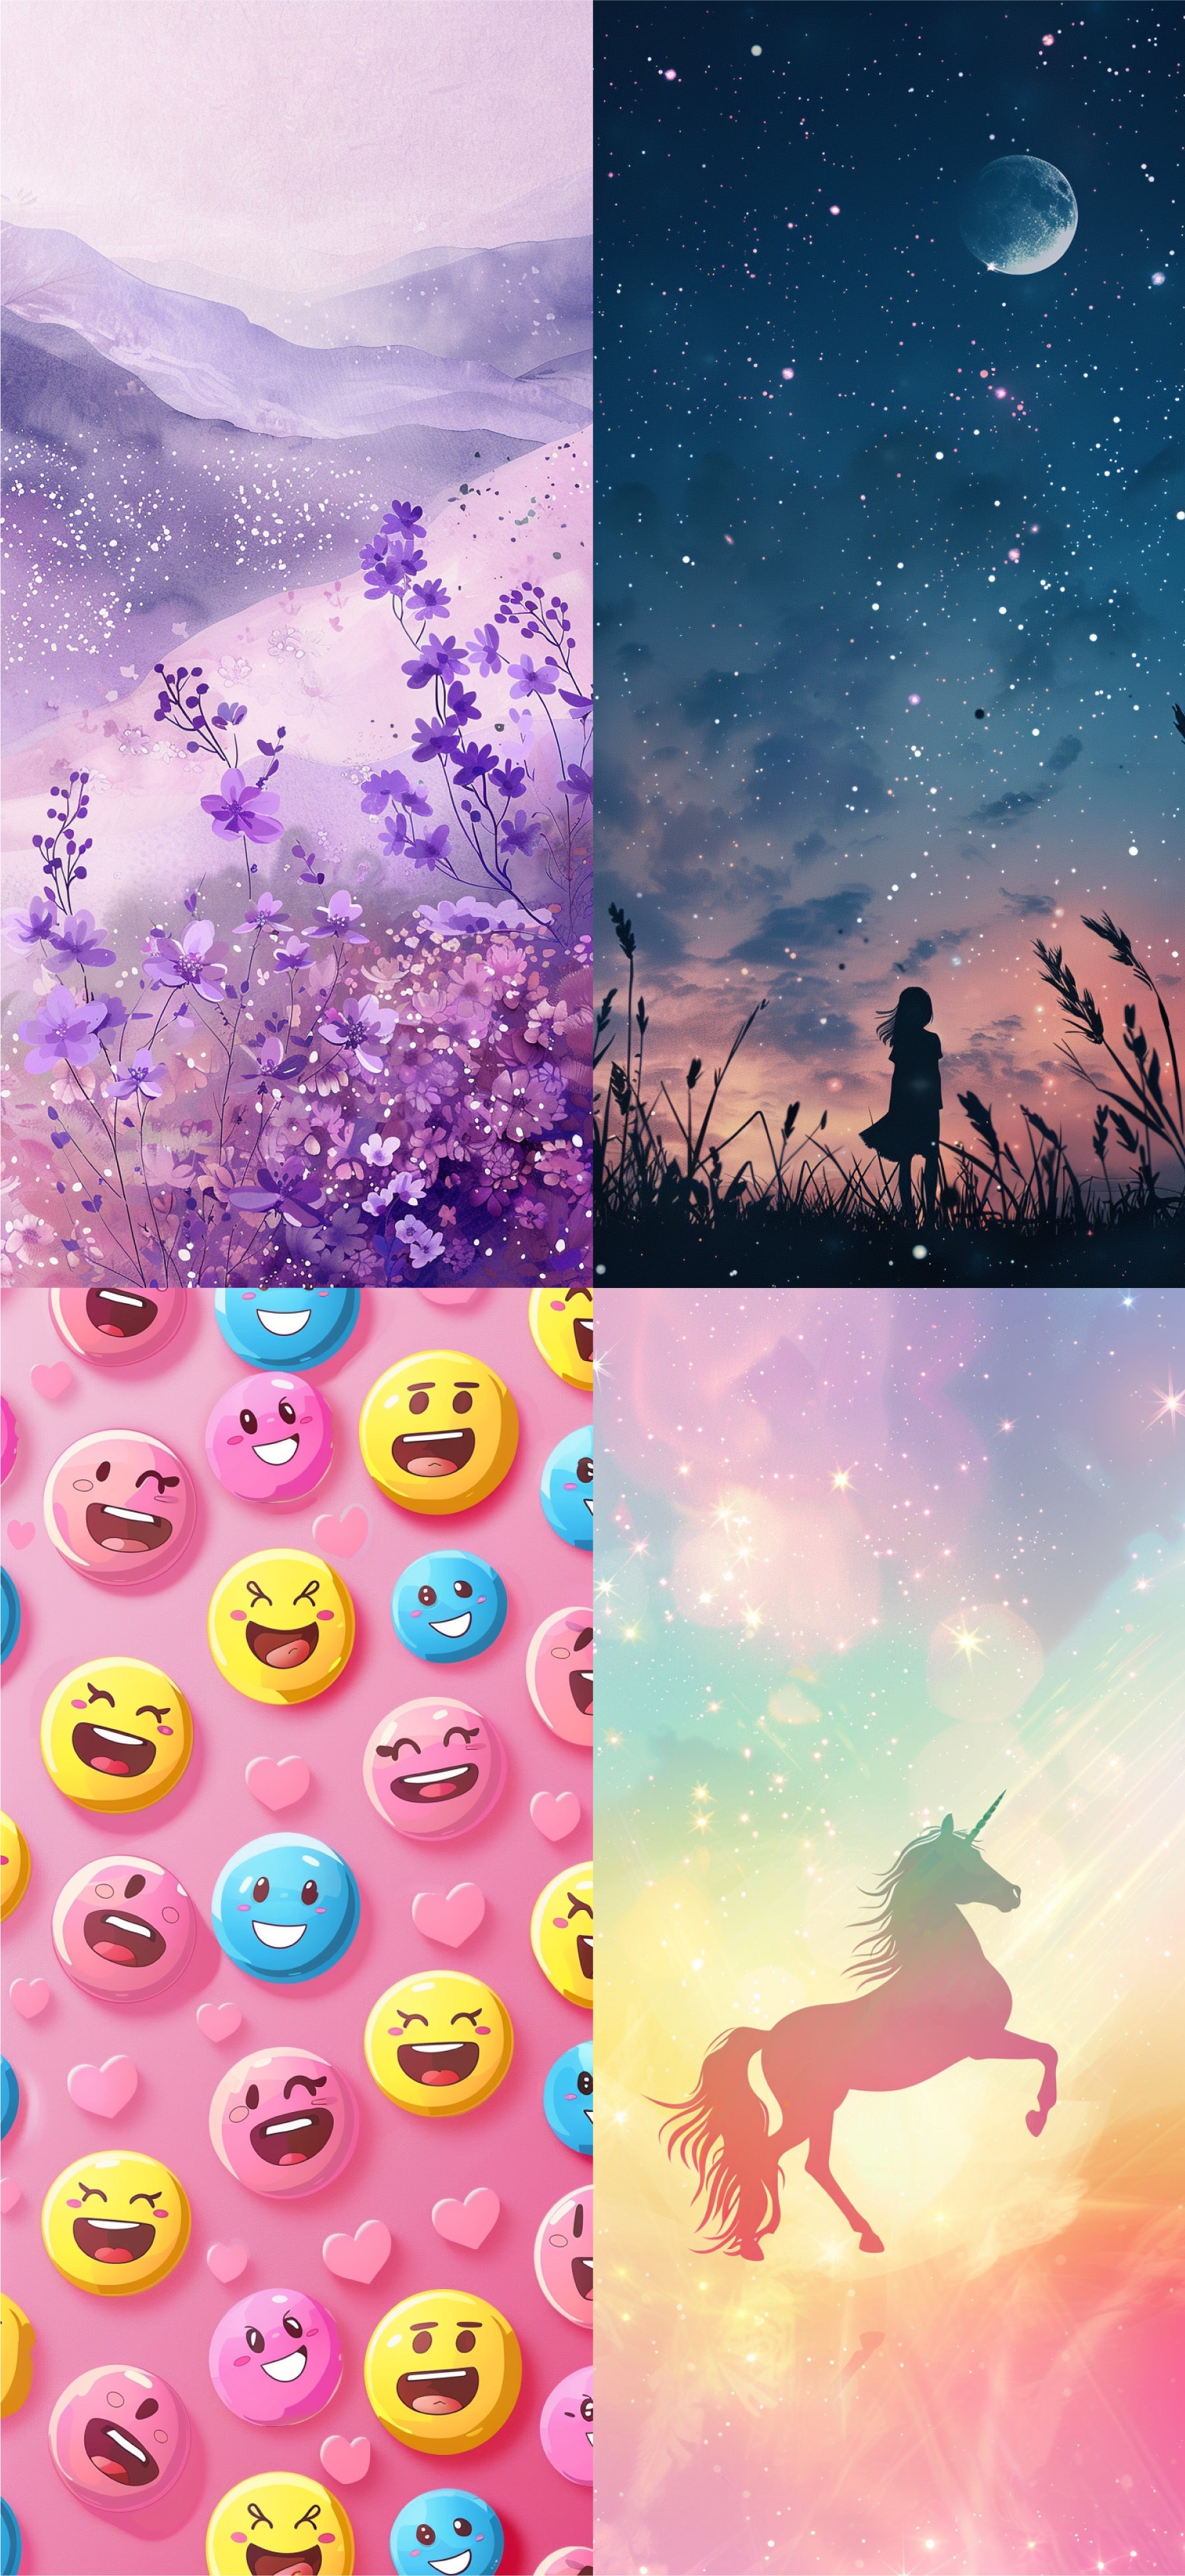 Cute-Girly-iPhone-Wallpapers-Free-4k-HD-Download-Pinterest-Tall-Plain